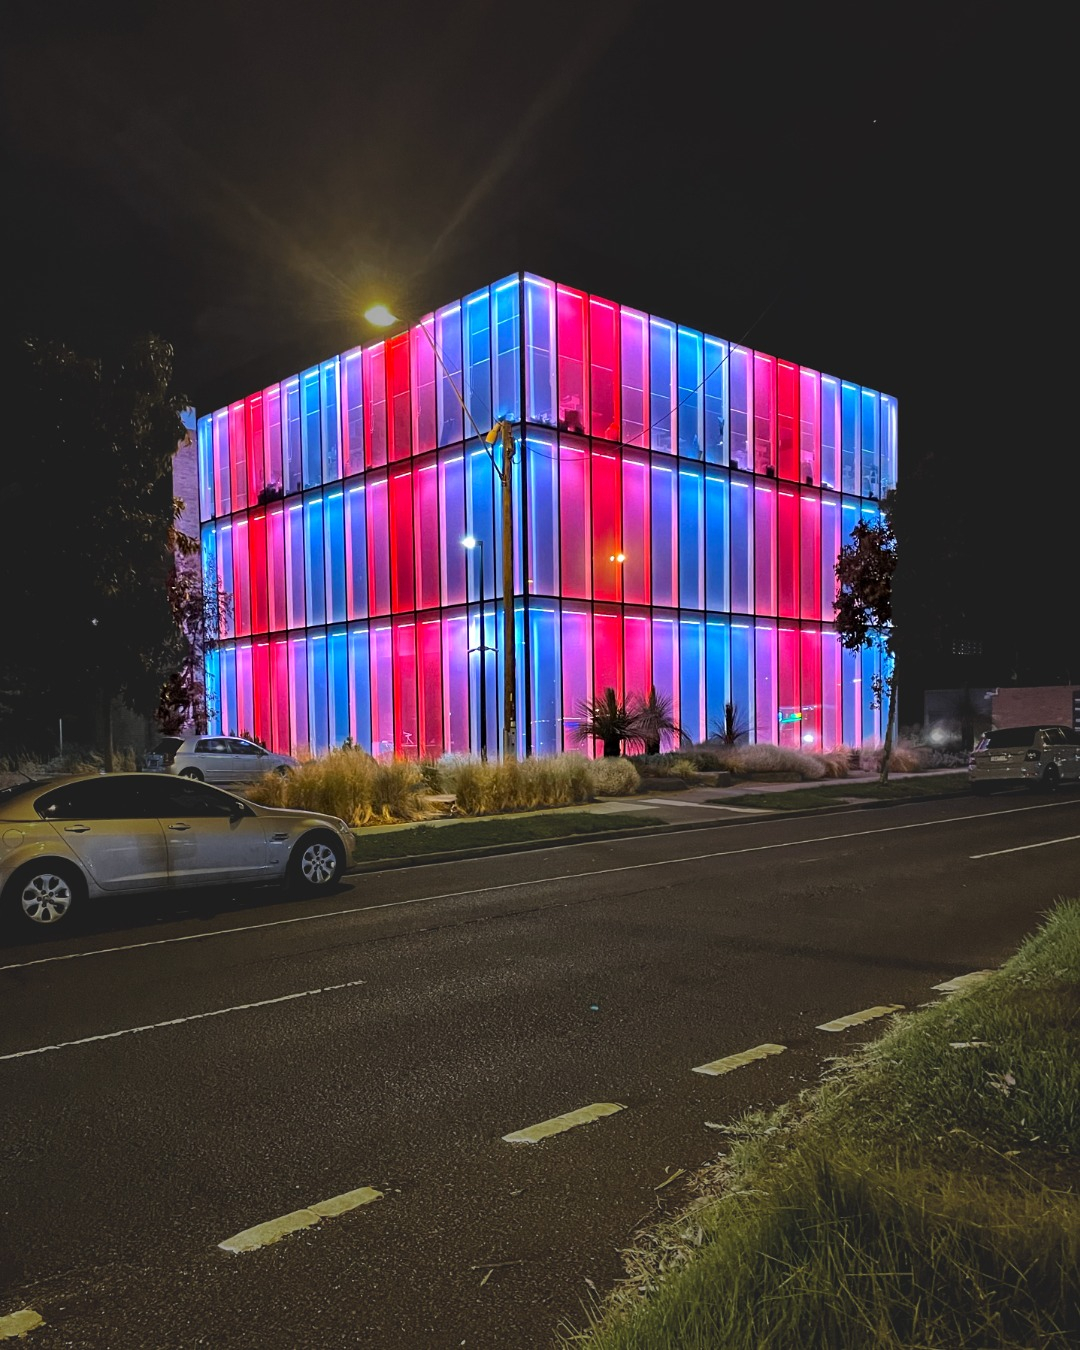 Broadmeadows Town Hall glass cube building is seen from across the street illuminated in red, pink and blue